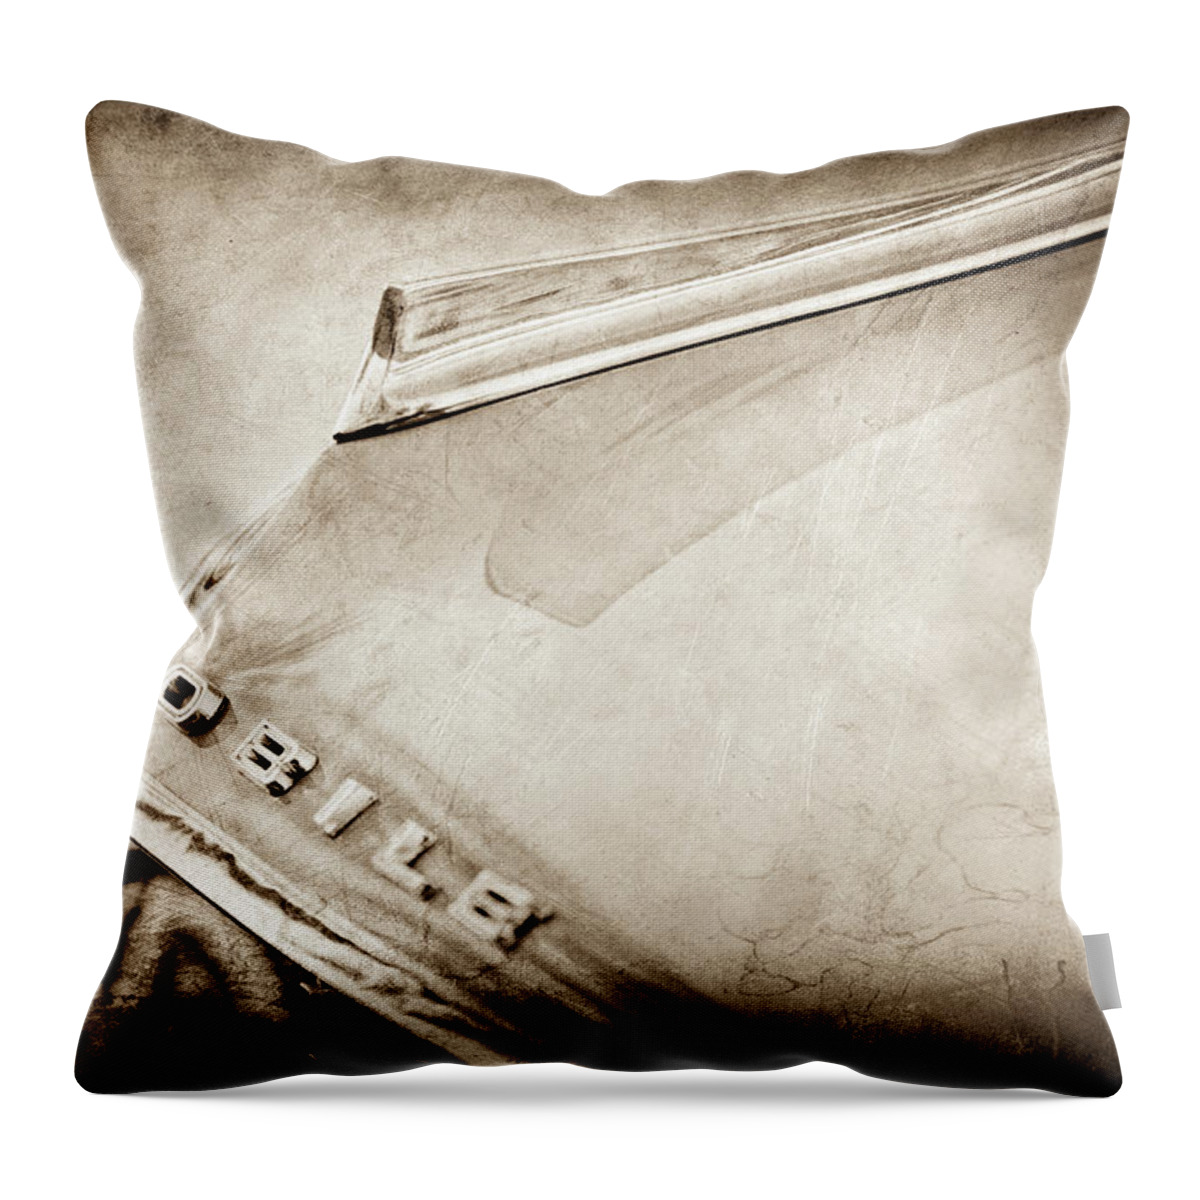 1962 Oldsmobile Hood Ornament And Emblem Throw Pillow featuring the photograph 1962 Oldsmobile Hood Ornament and Emblem -0598s by Jill Reger